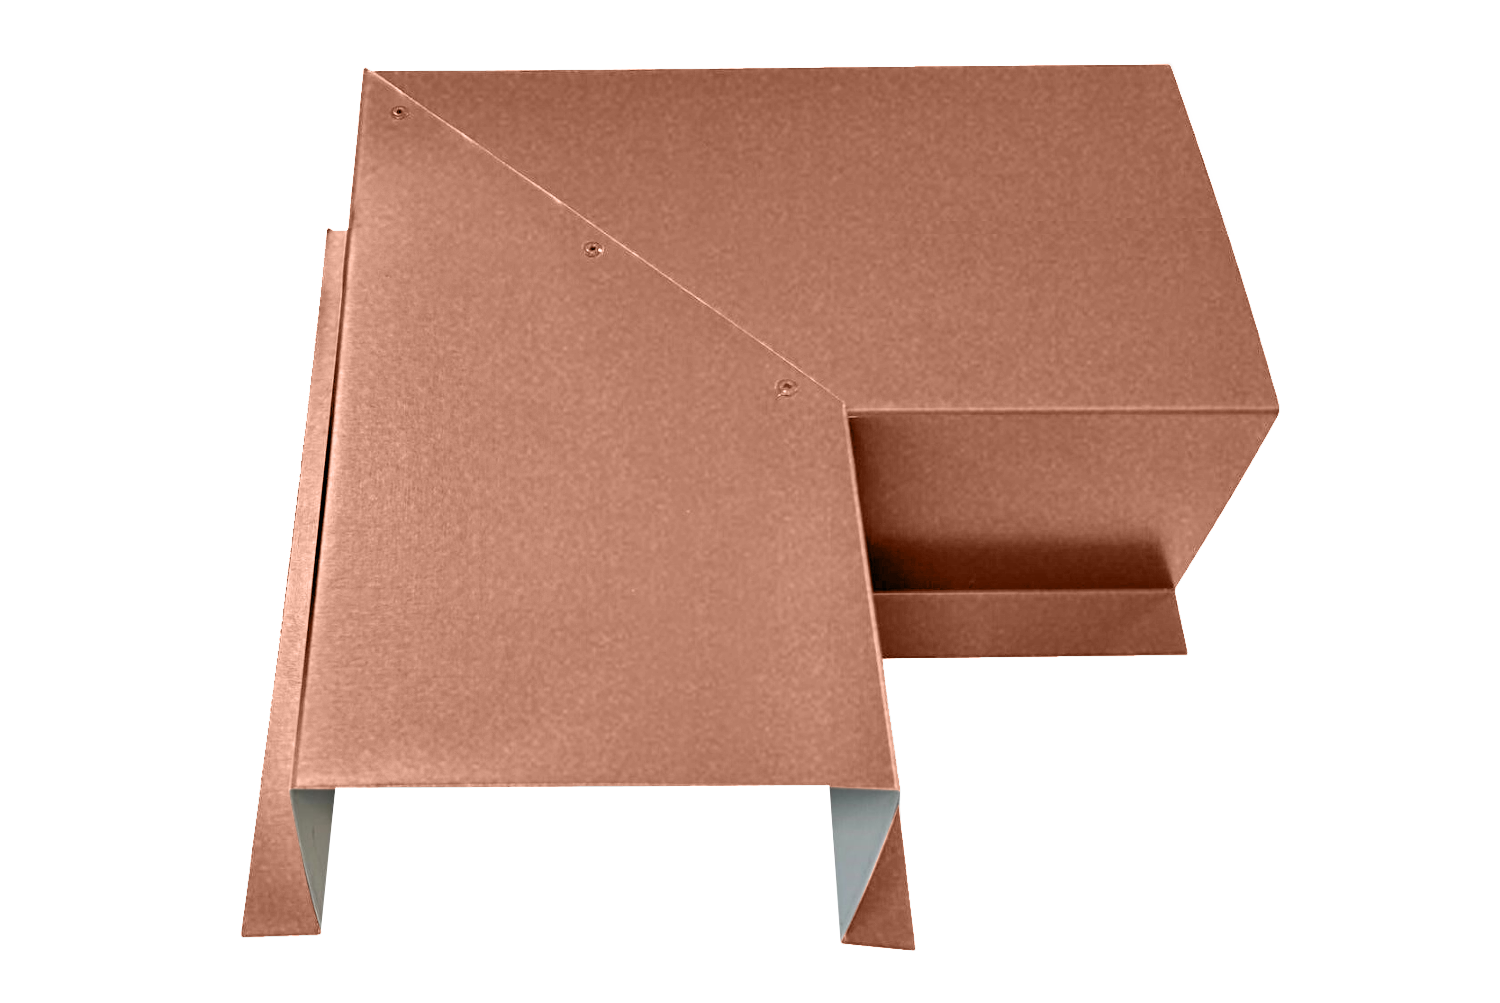 A 3D rendering of a copper-colored, L-shaped object made of premium quality 24 gauge steel bent sheet metal, featuring clean edges and a smooth surface. The object has a modern and minimalist design with sharp angles and folds, with one side appearing to be taller than the other. This is the Perma Cover Commercial Series - 24 Gauge Line Set Cover Side Turning Elbows - Premium Quality.